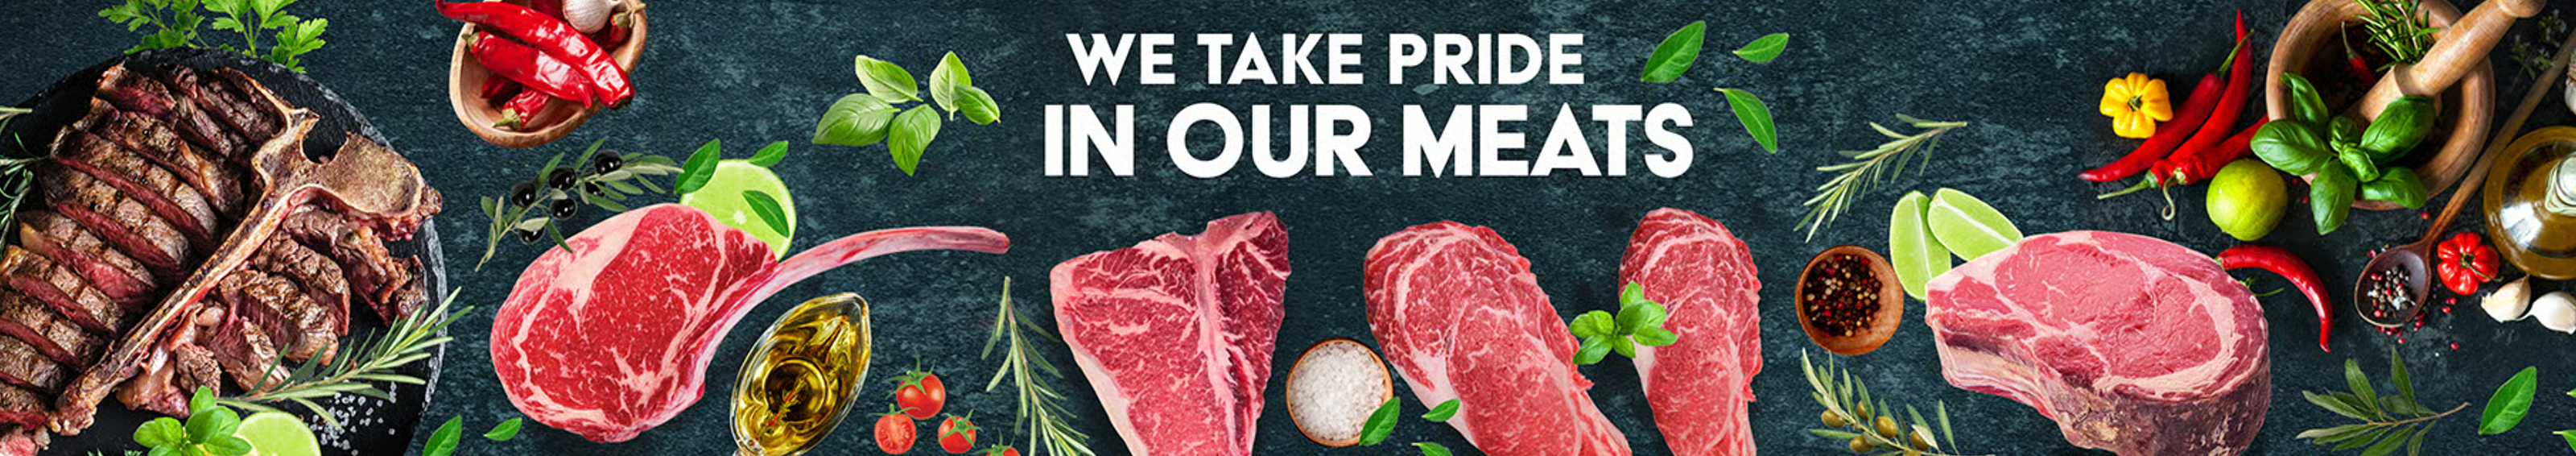 We Take Pride In Our Meats